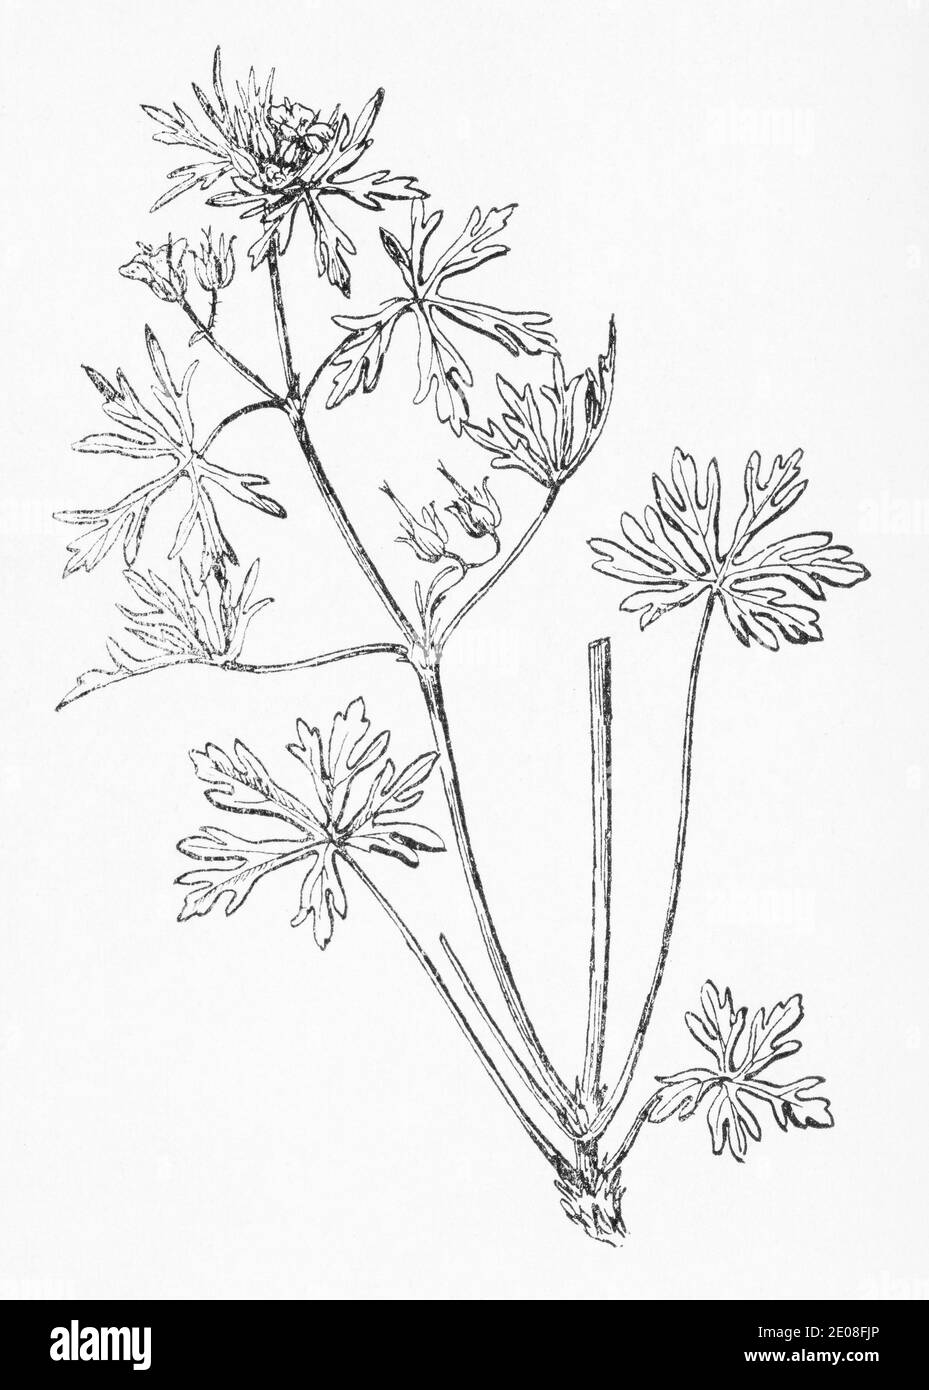 Old botanical illustration engraving of Cut-leaved Geranium / Geranium dissectum. Traditional medicinal herbal plant. See Notes Stock Photo